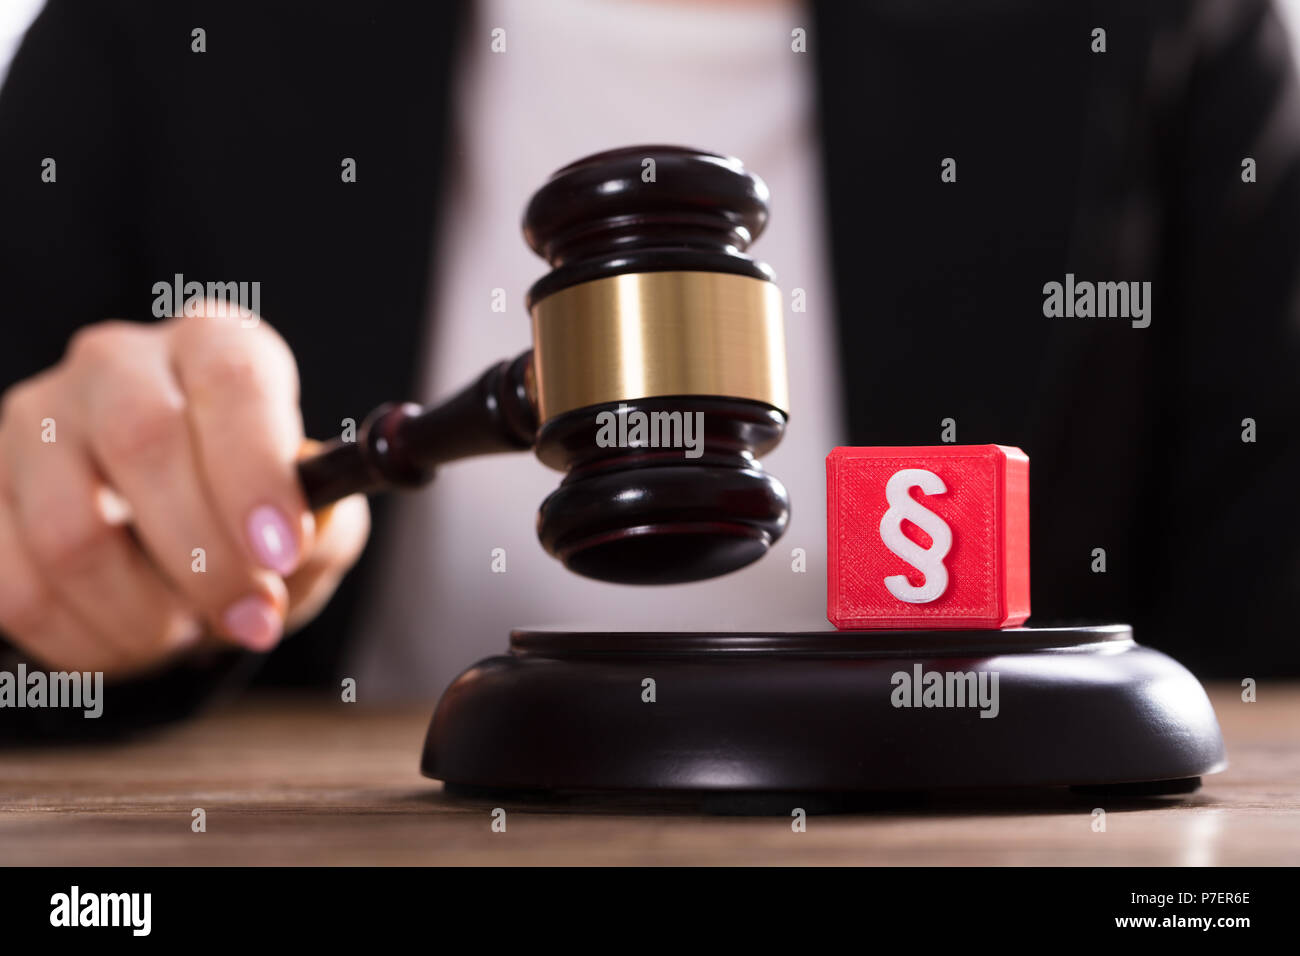 Close-up Of Cubic Block With Paragraph Symbol Near Judge Striking Mallet Stock Photo